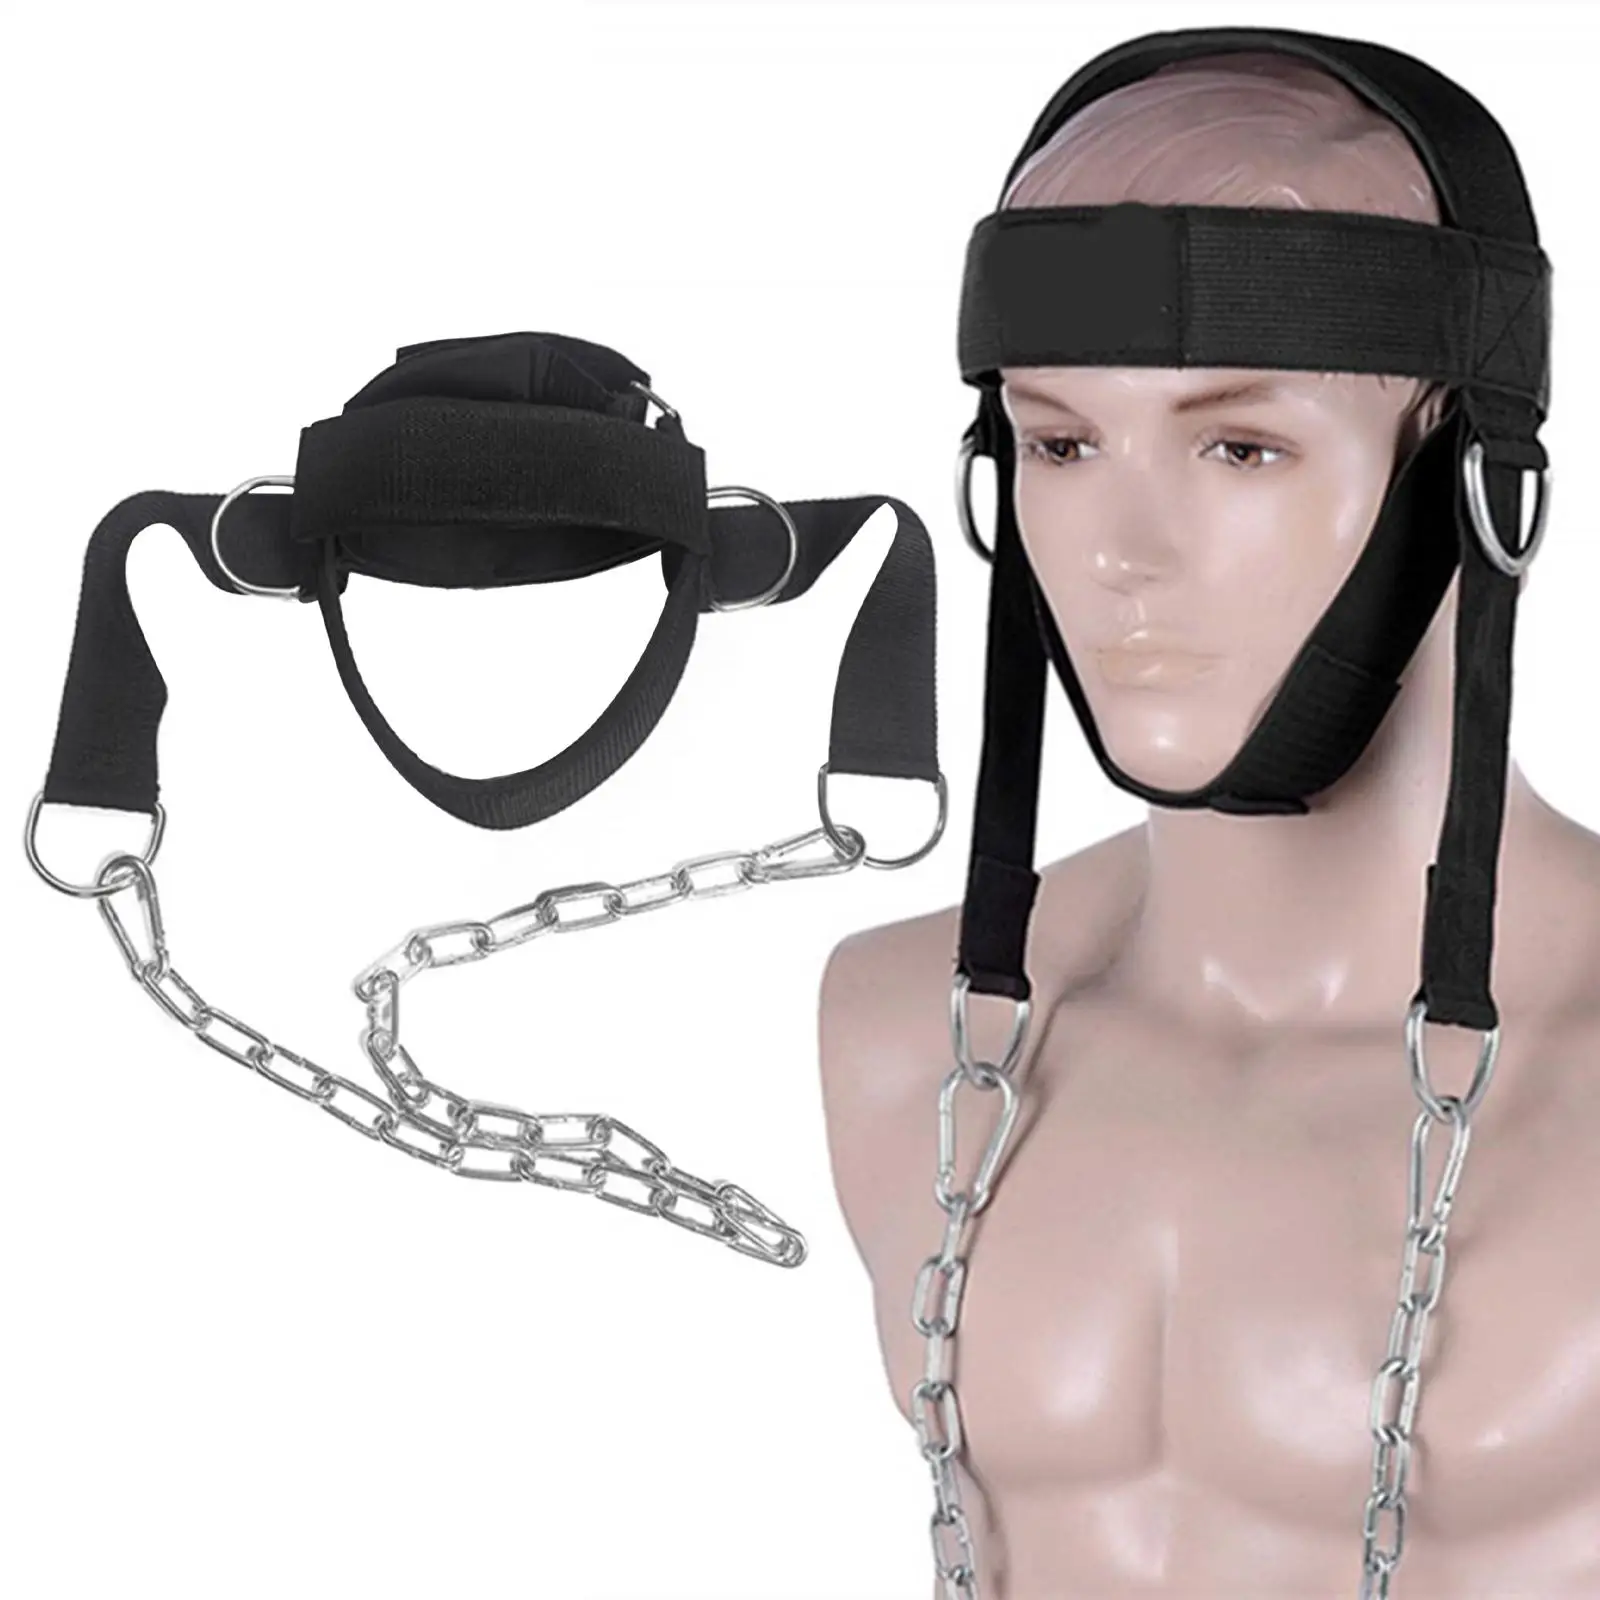 1x Head Neck Harness Oxford Cloth for Weight Lifting Home Fitness Training